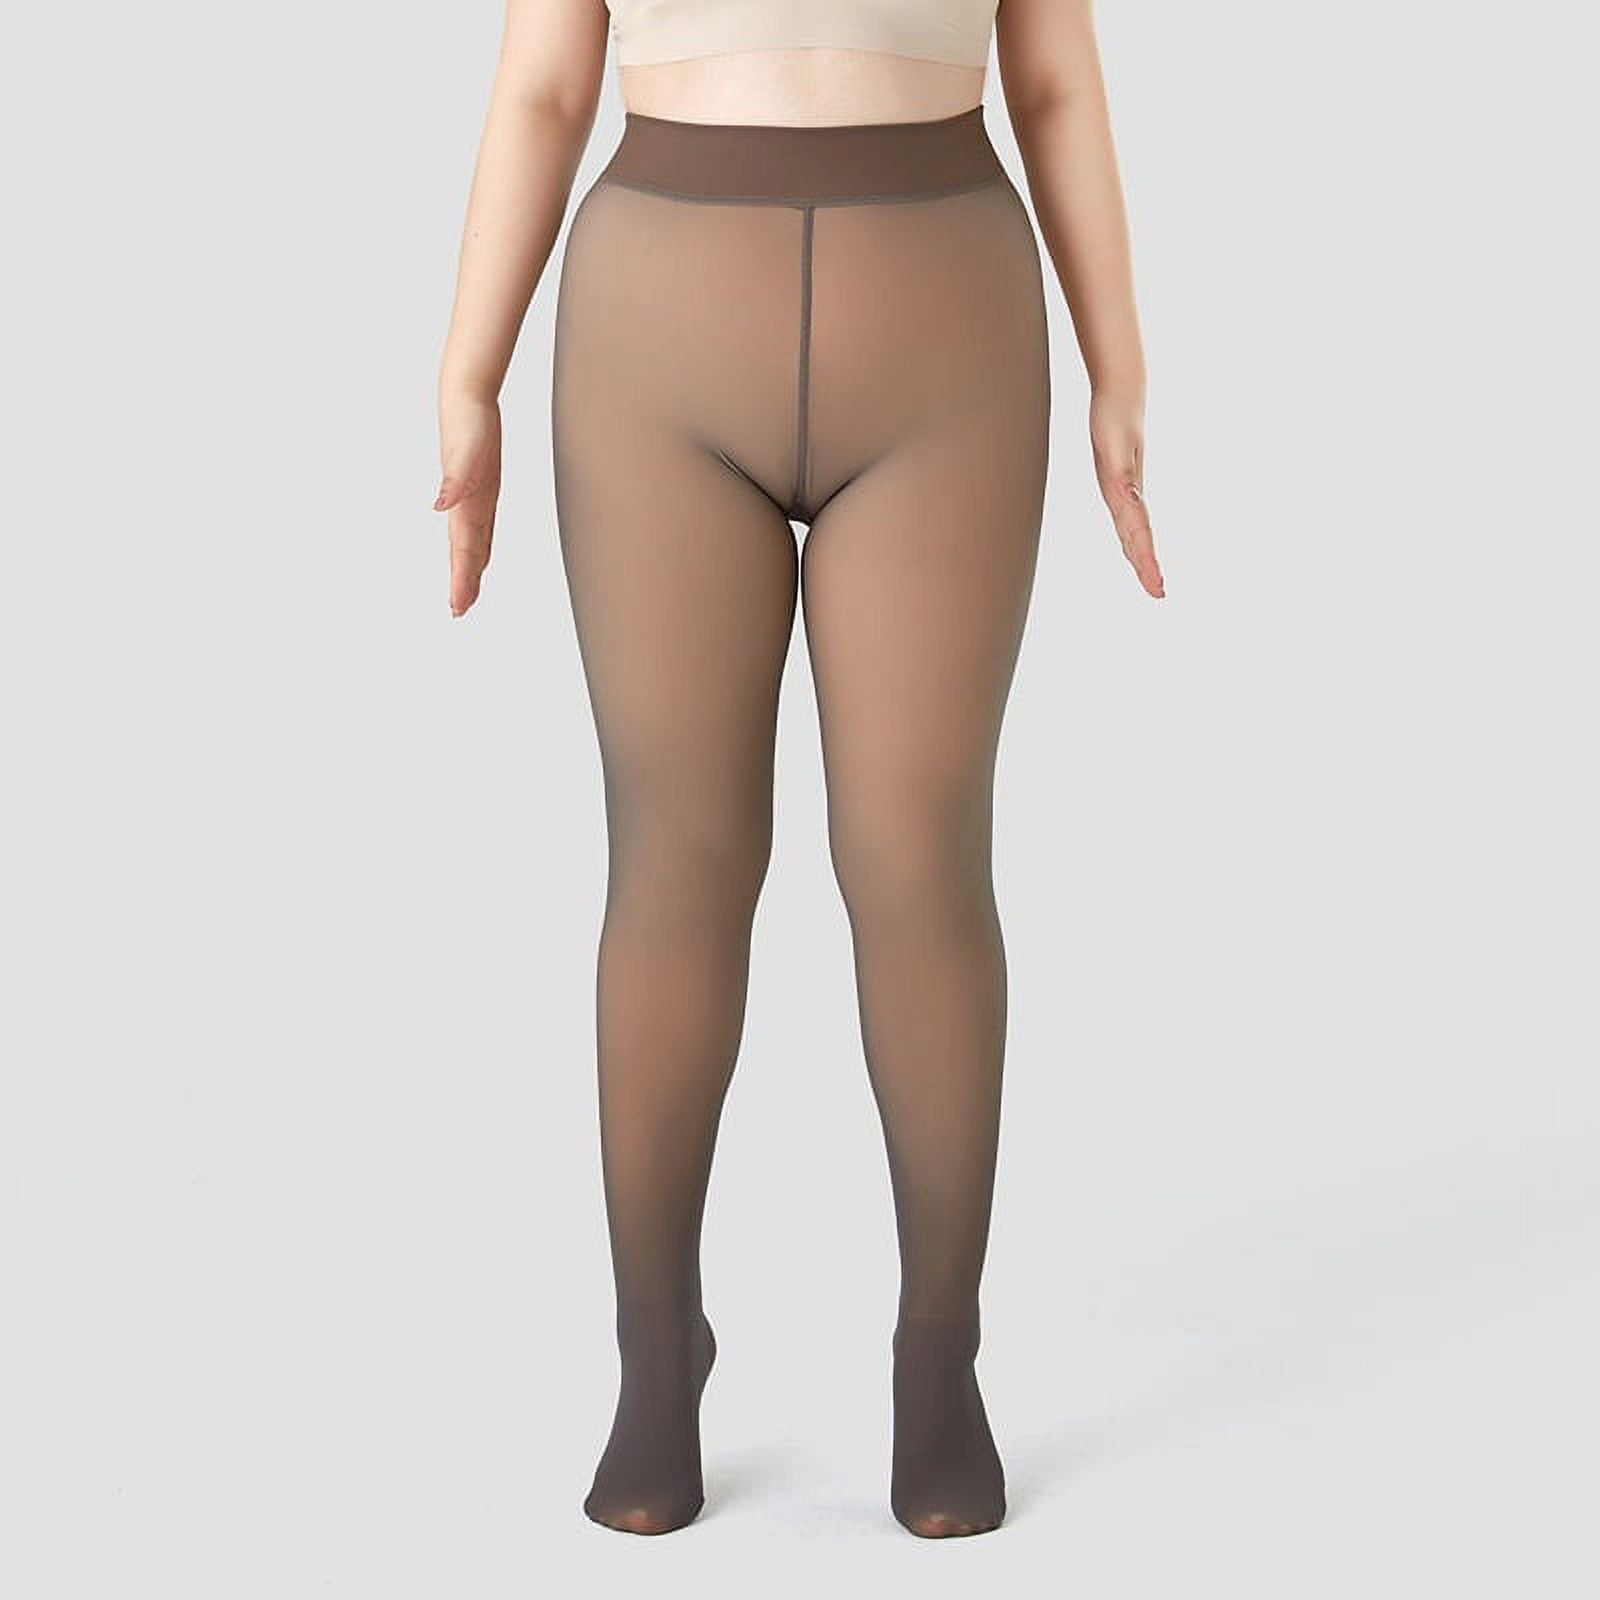 Fleece Lined Tights for Women Fake Translucent Nude Tights